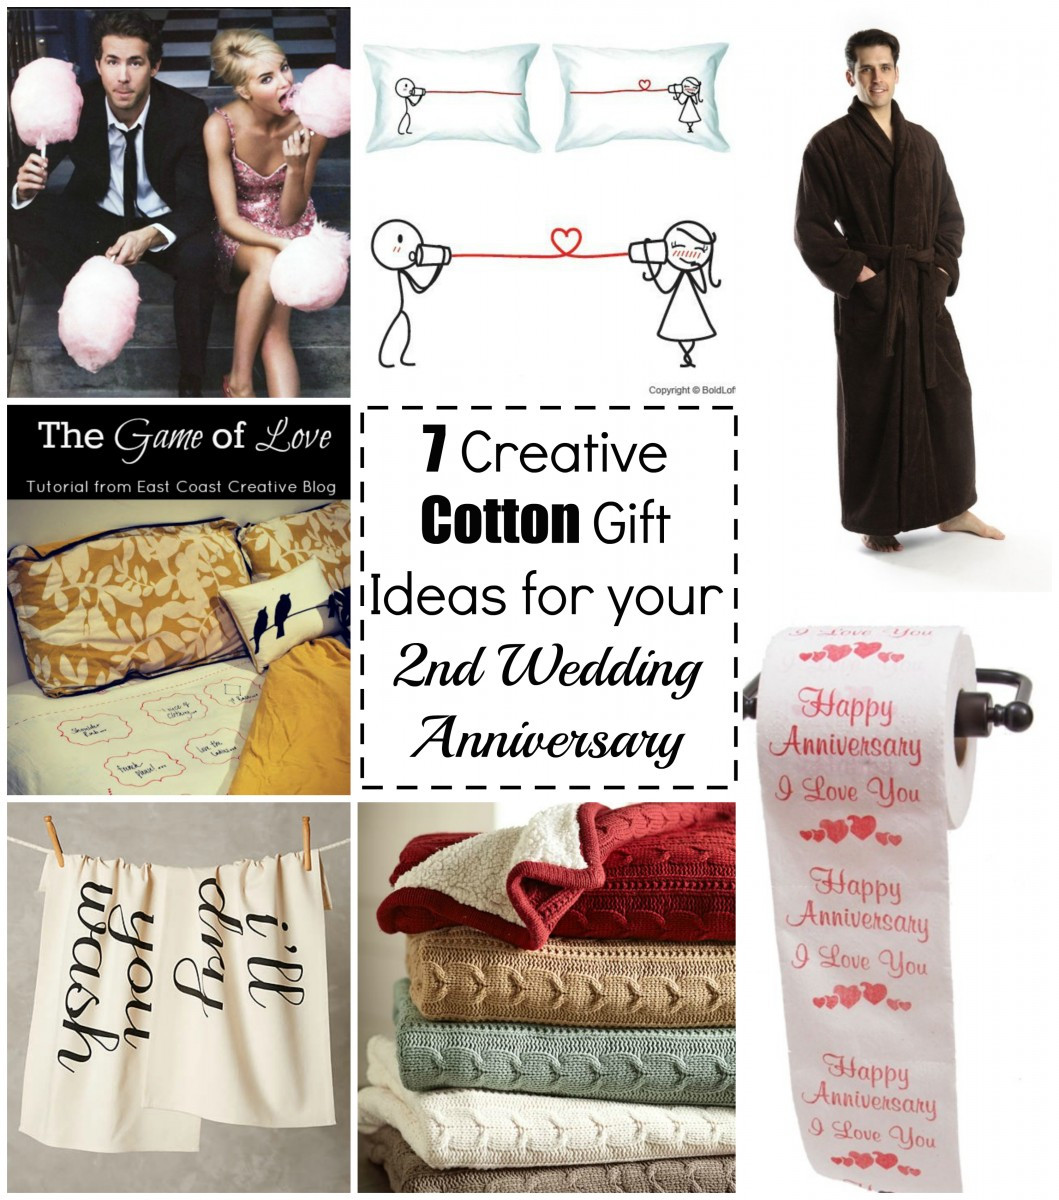 Second Anniversary Gift Ideas For Her
 7 Cotton Gift Ideas for your 2nd Wedding Anniversary